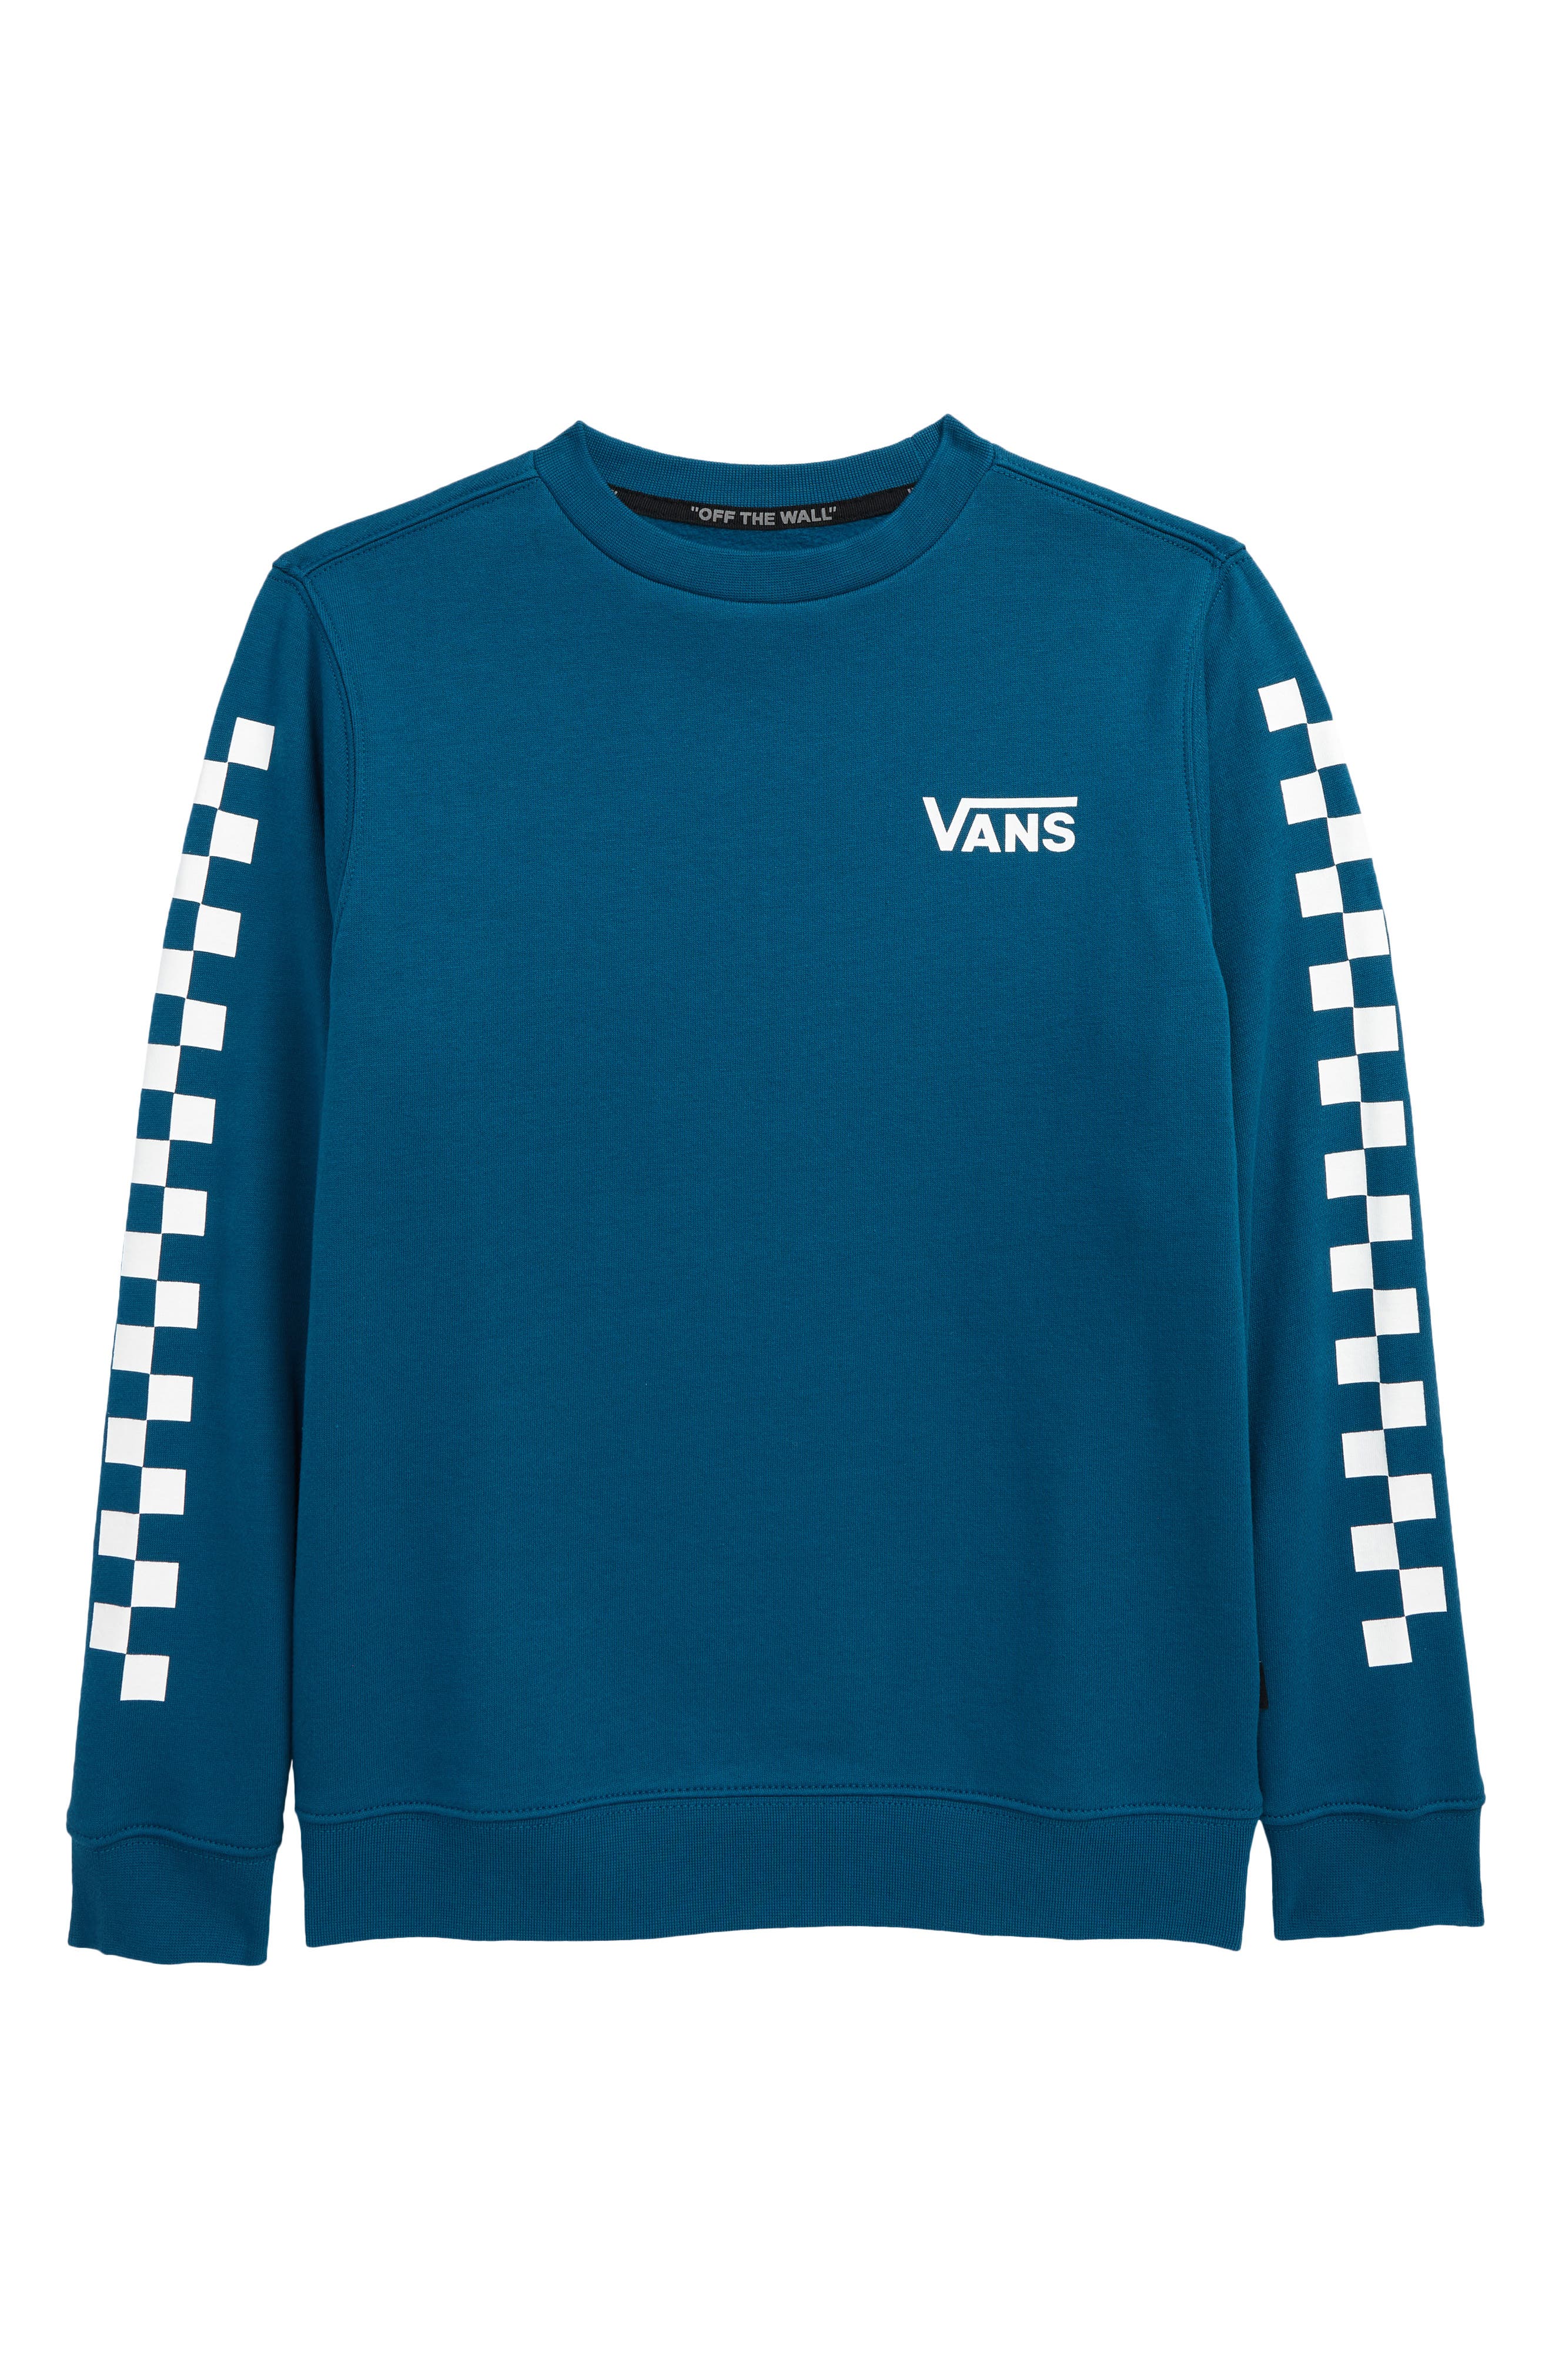 Vans Kids' Off the Wall Long Sleeve Graphic Tee in Blue Coral